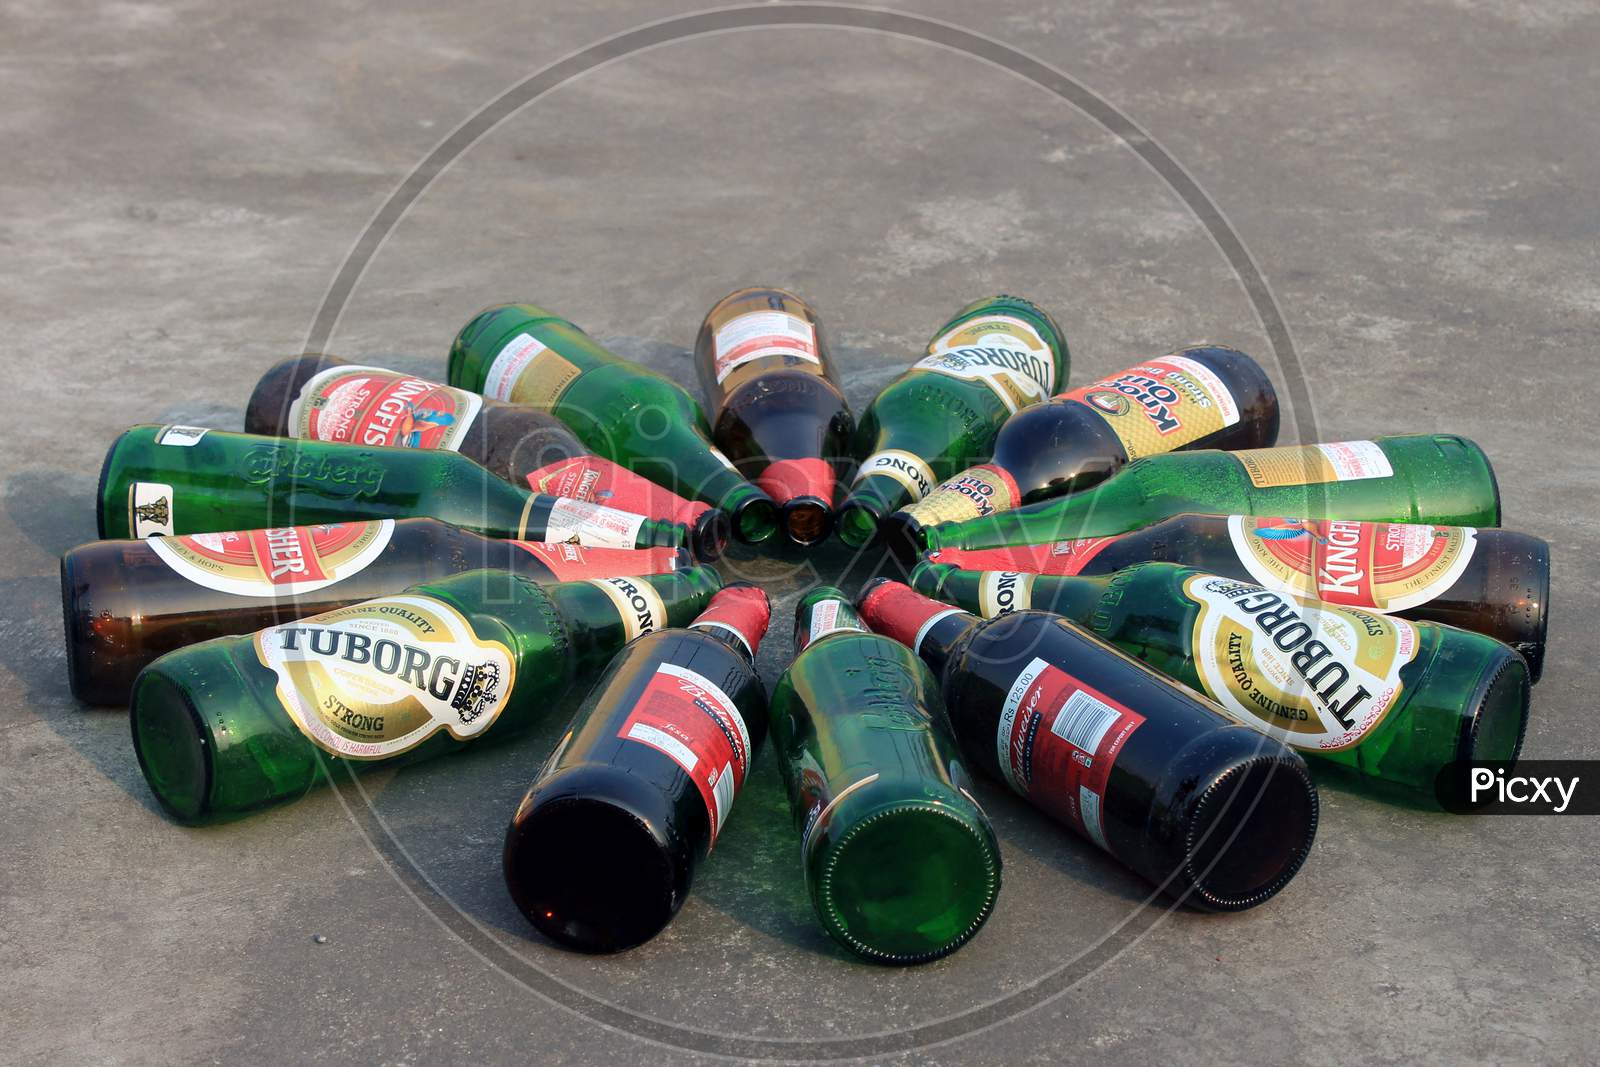 Alcohol or Beer Bottles on a Beach Shore